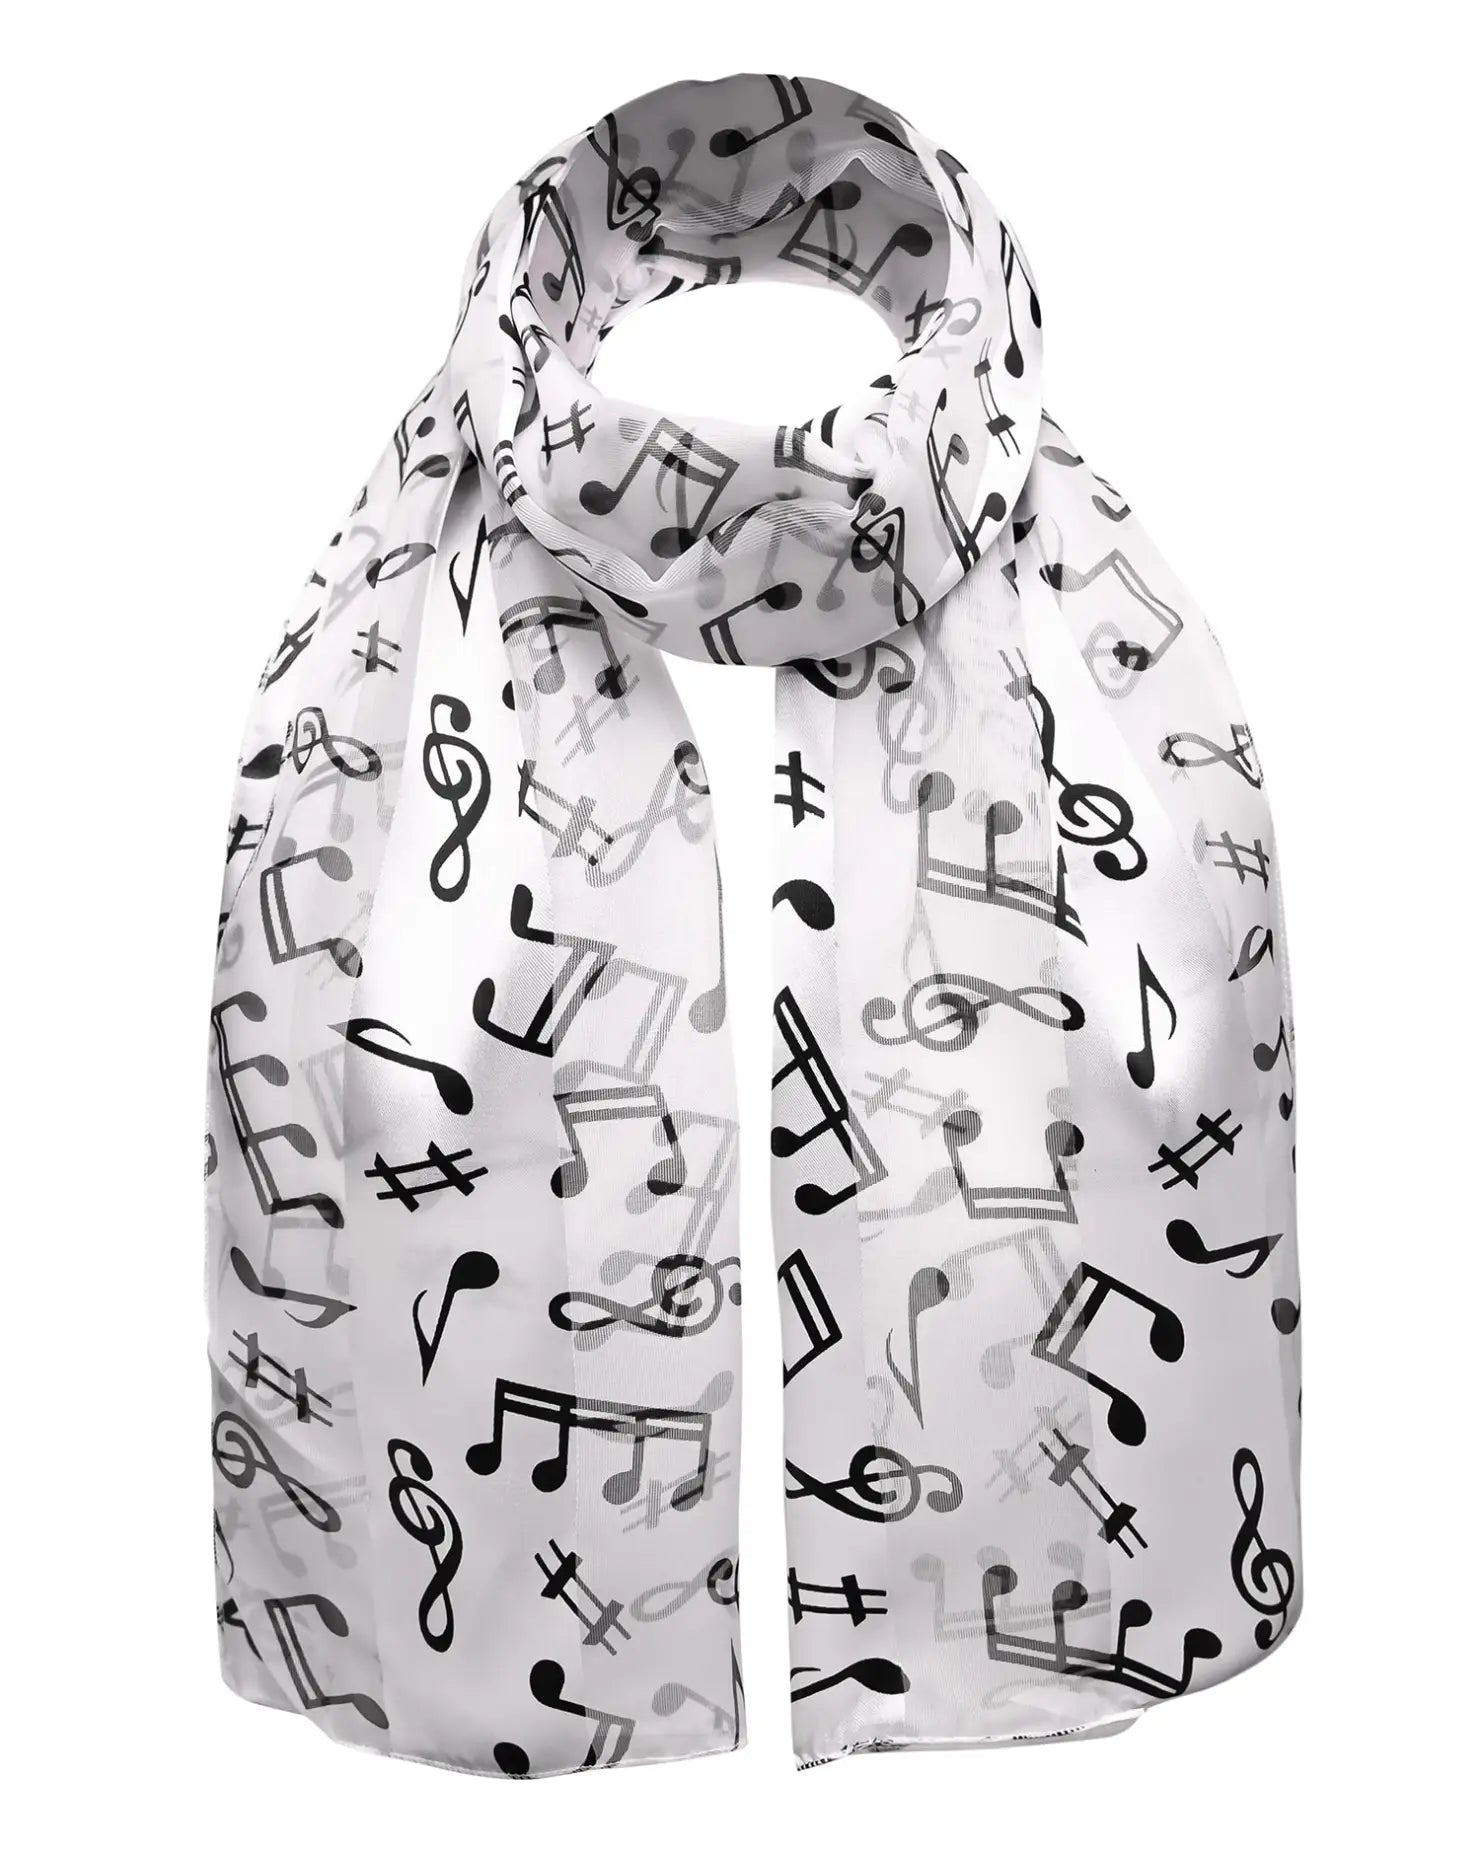 White satin stripe scarf with musical notes pattern